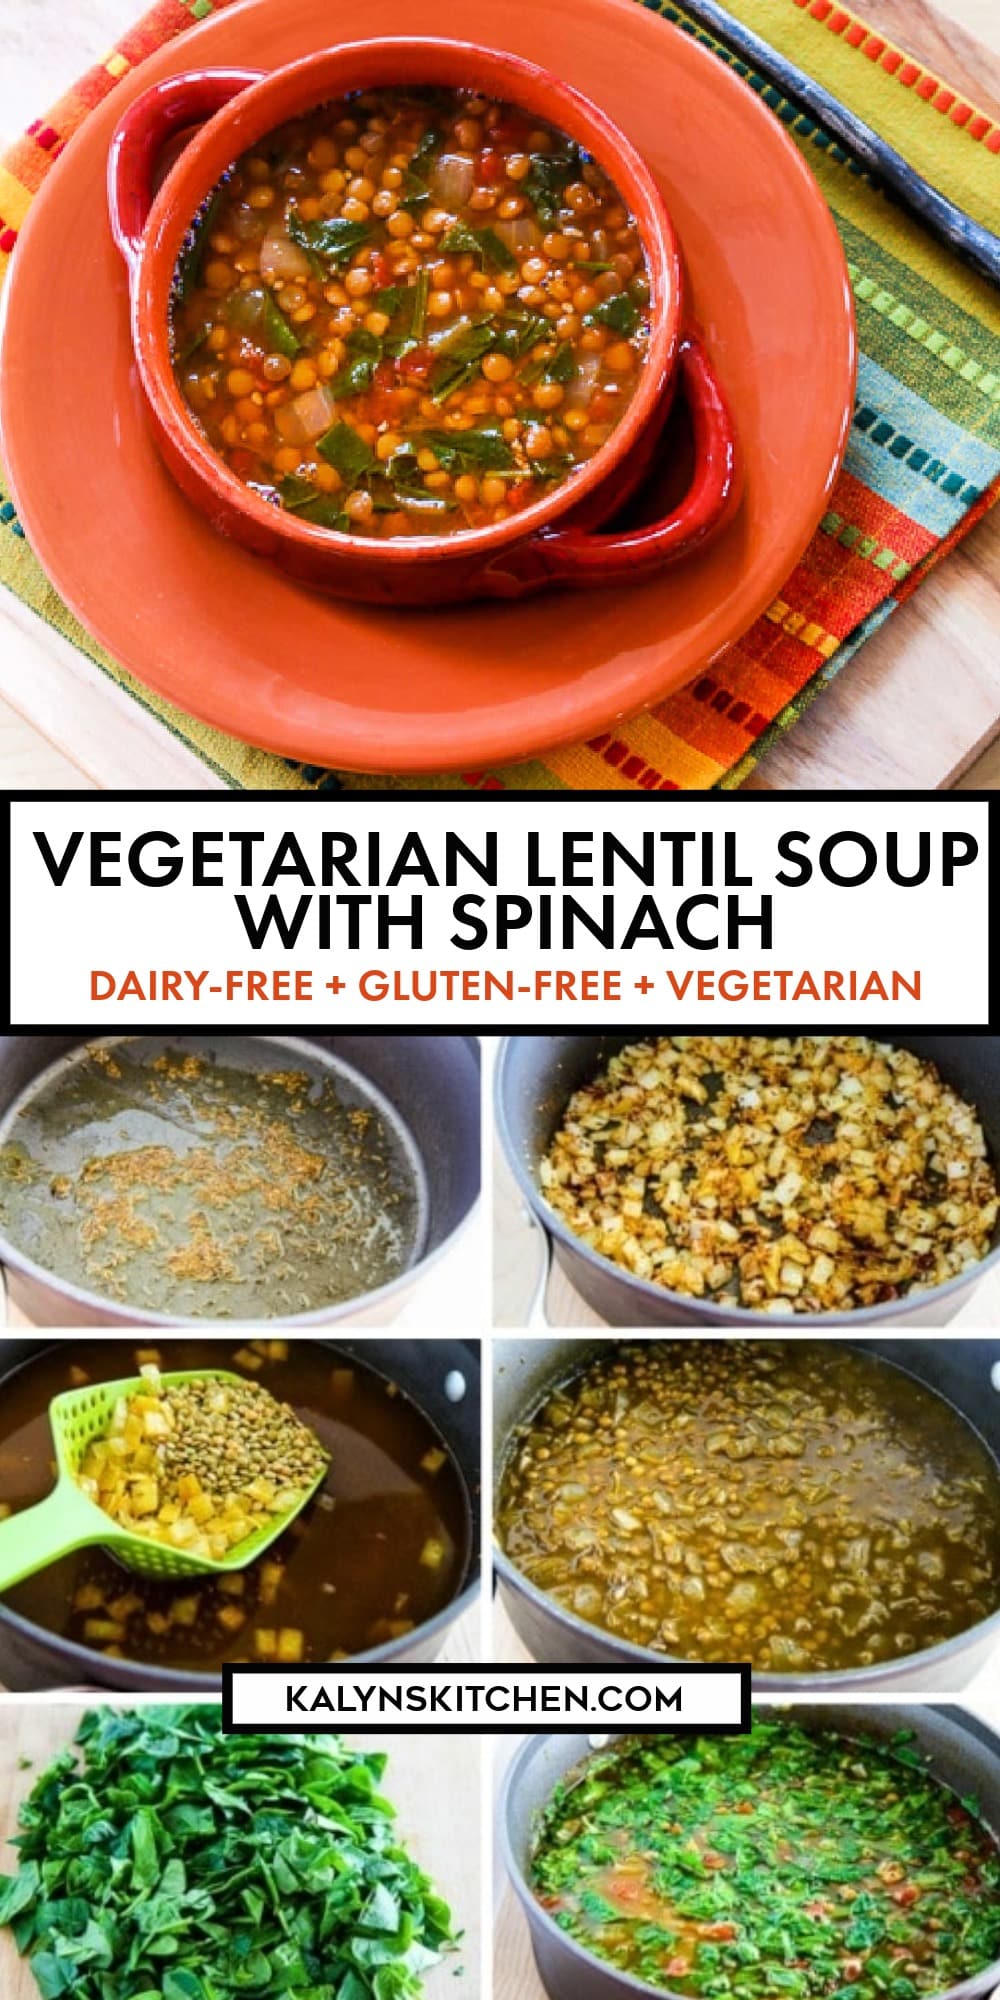 Pinterest image of Vegetarian Lentil Soup with Spinach